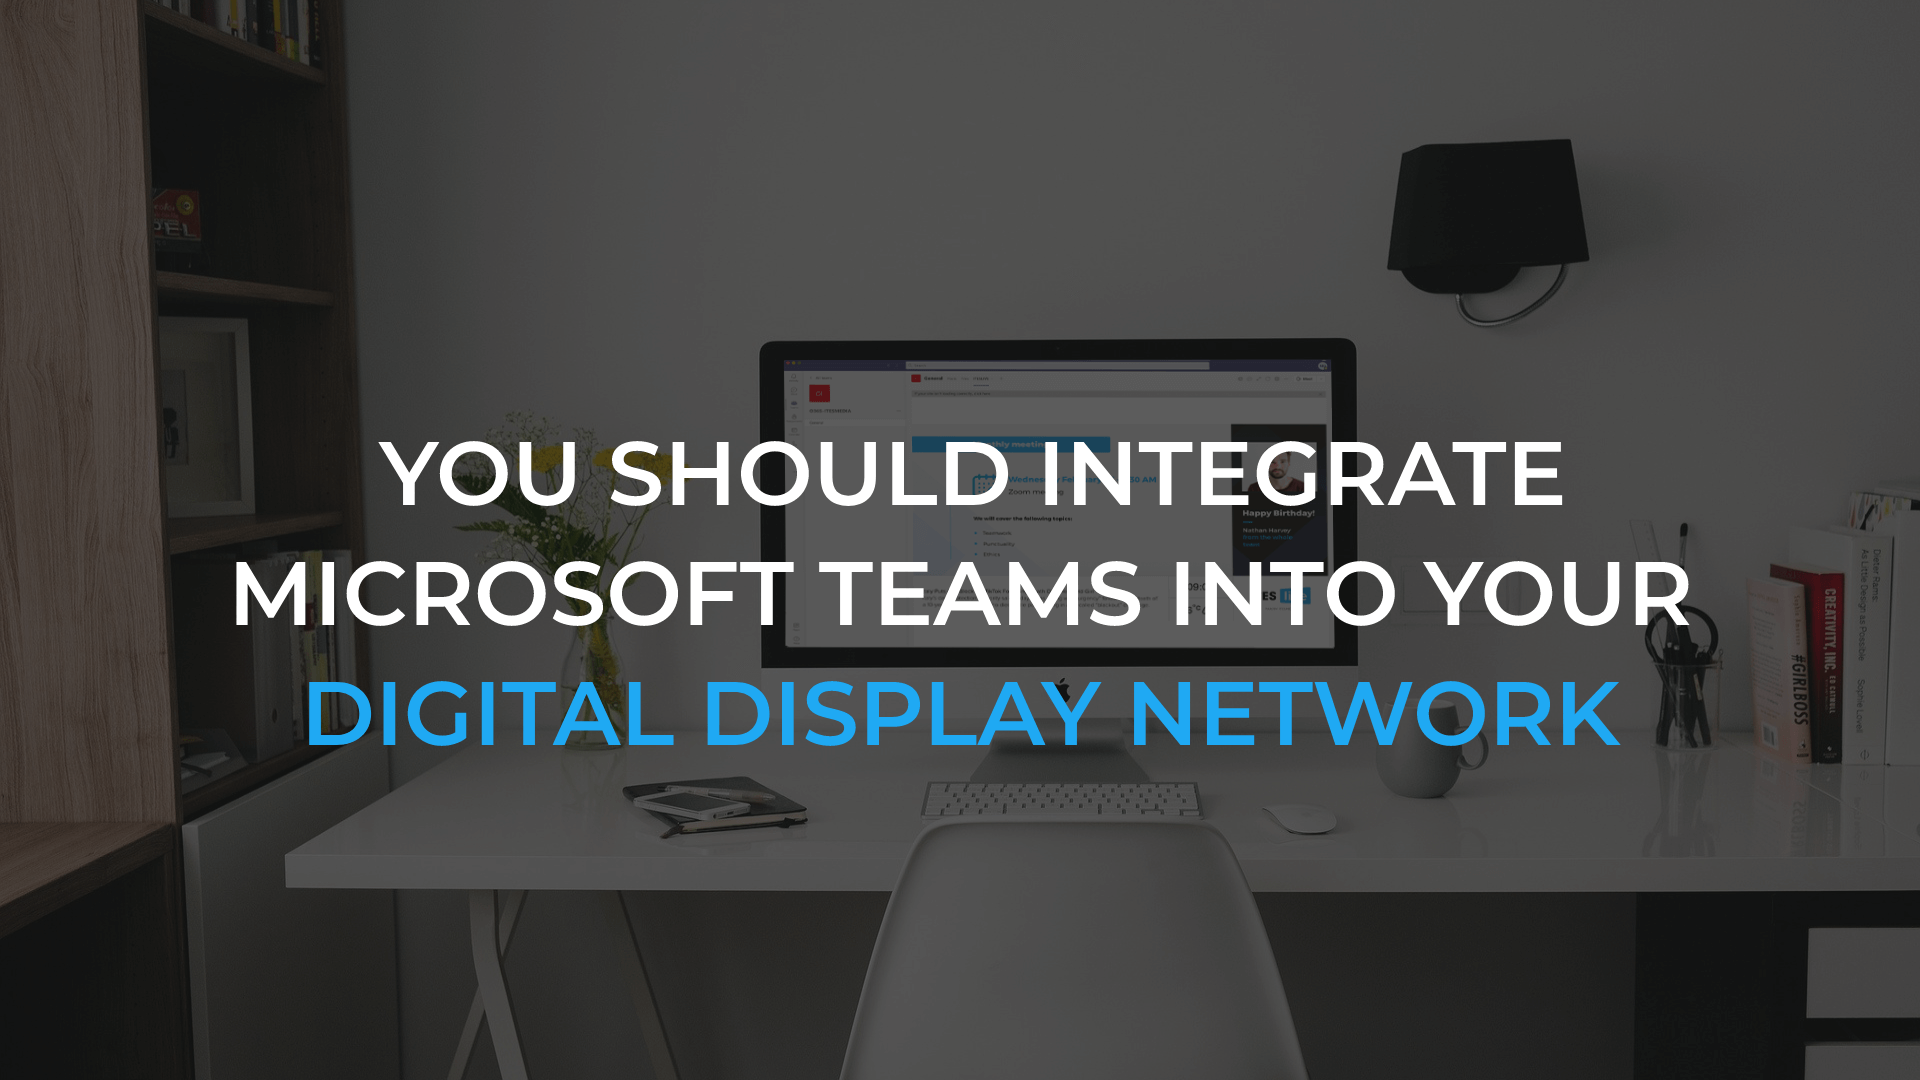 Why you should integrate Microsoft Teams into your digital display network